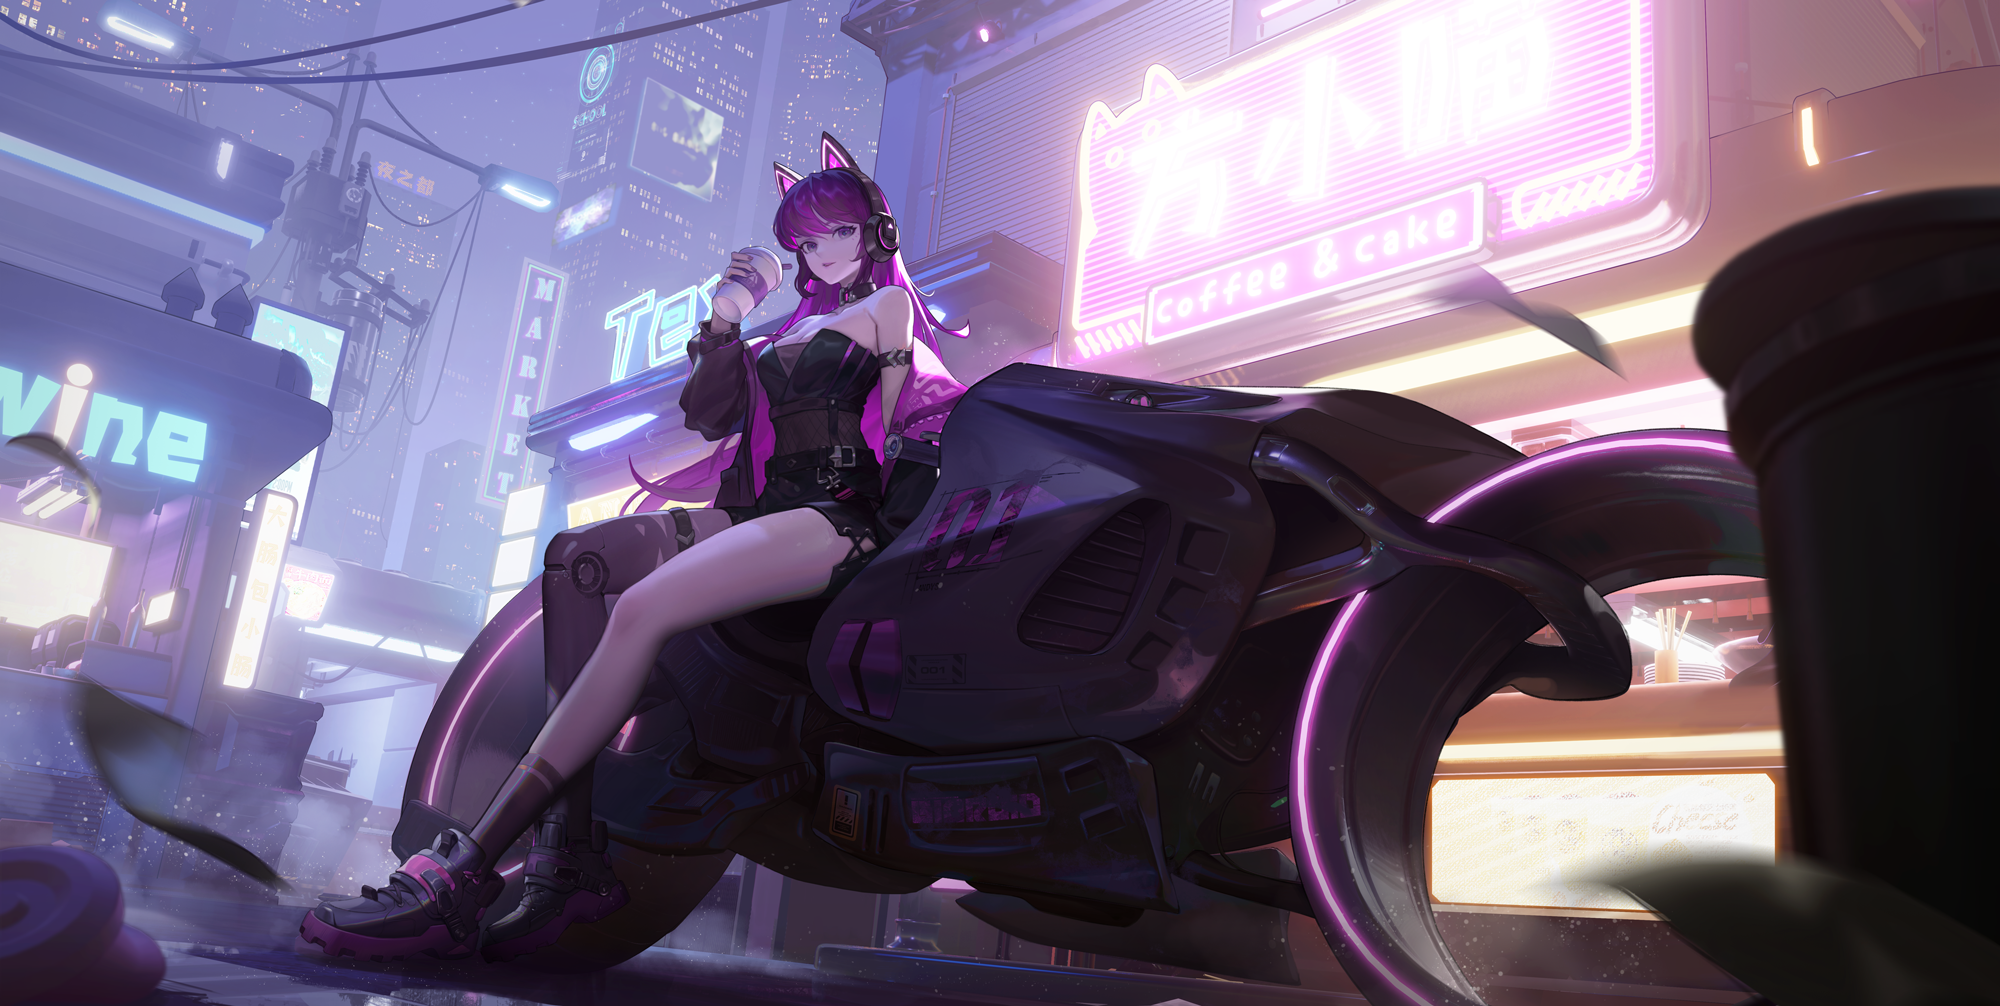 Anime 2000x1006 Big Orange AD anime girls cyberpunk science fiction motorcycle purple hair purple eyes cat ears headsets futuristic city futuristic cityscape LEDs artificial lights skyscraper legs sitting cafe drinking coffee looking at viewer headphones lights